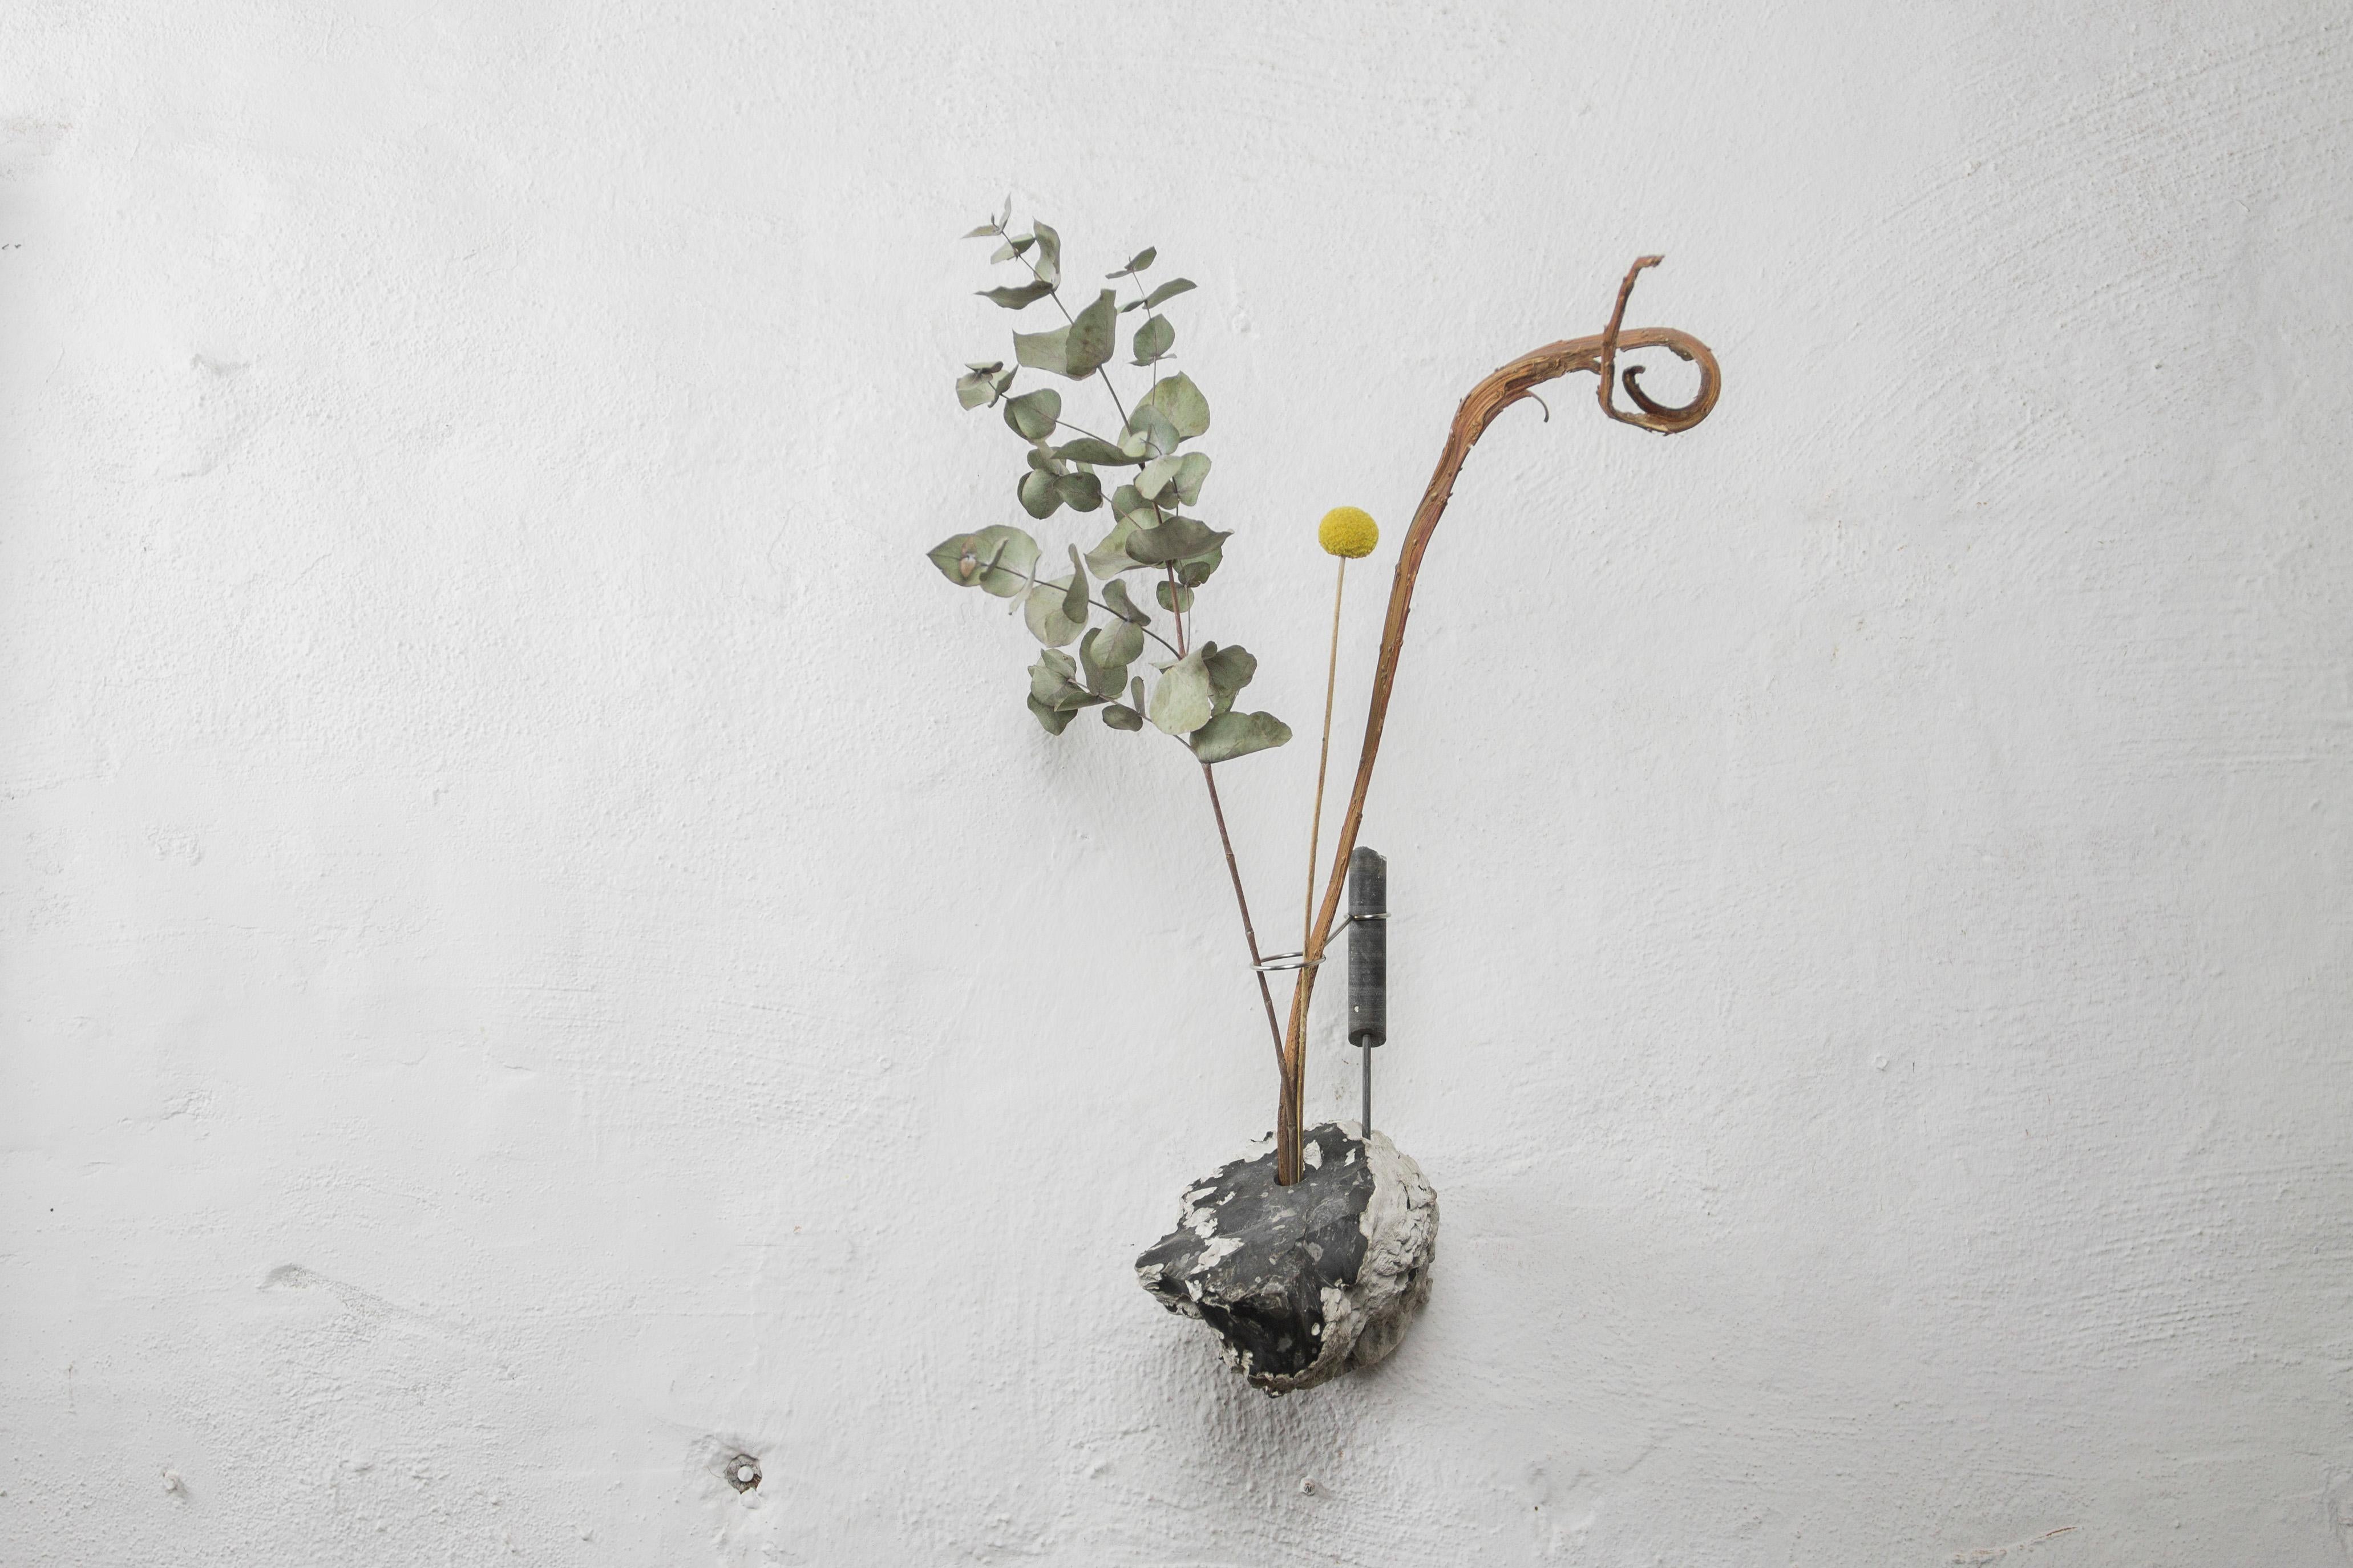 Silex Flintstone Flower Wall Vessel II by Studio DO
Dimensions: D 21.5 x W 11.5 x H 12 cm
Materials: Silex stone, stainless steel.
3.5 kg.

Flowers are intrinsically connected with composition and earth.
Influenced by varied vessels from past to